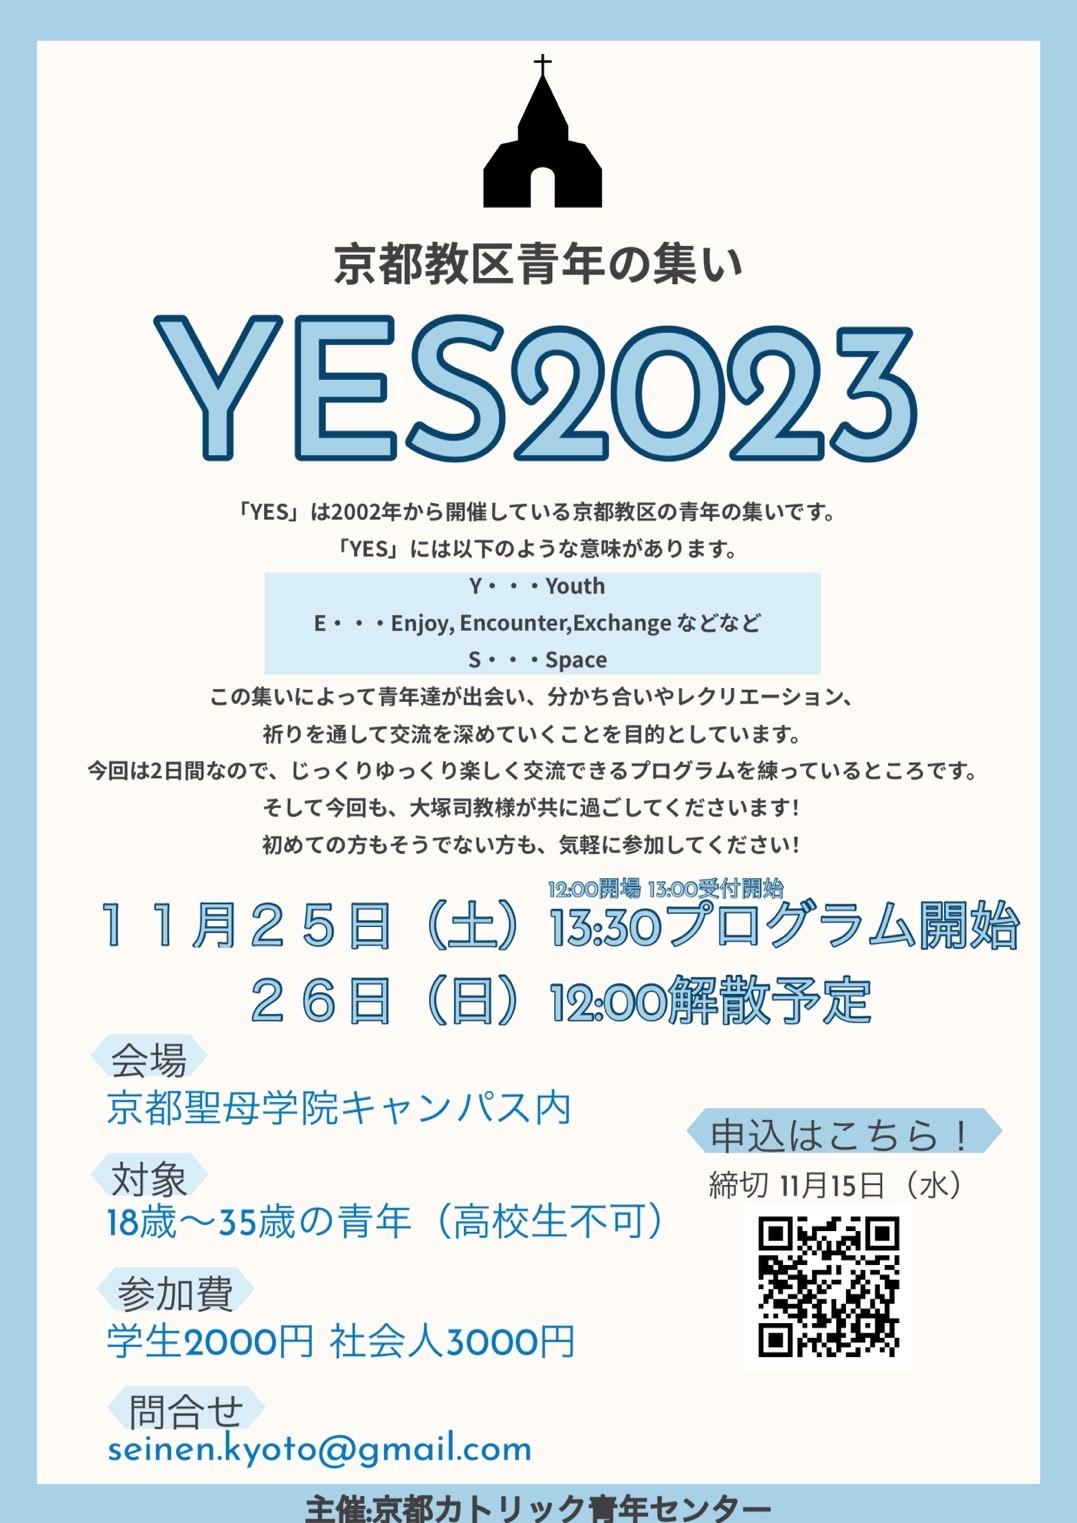 Kyoto Yes 2023